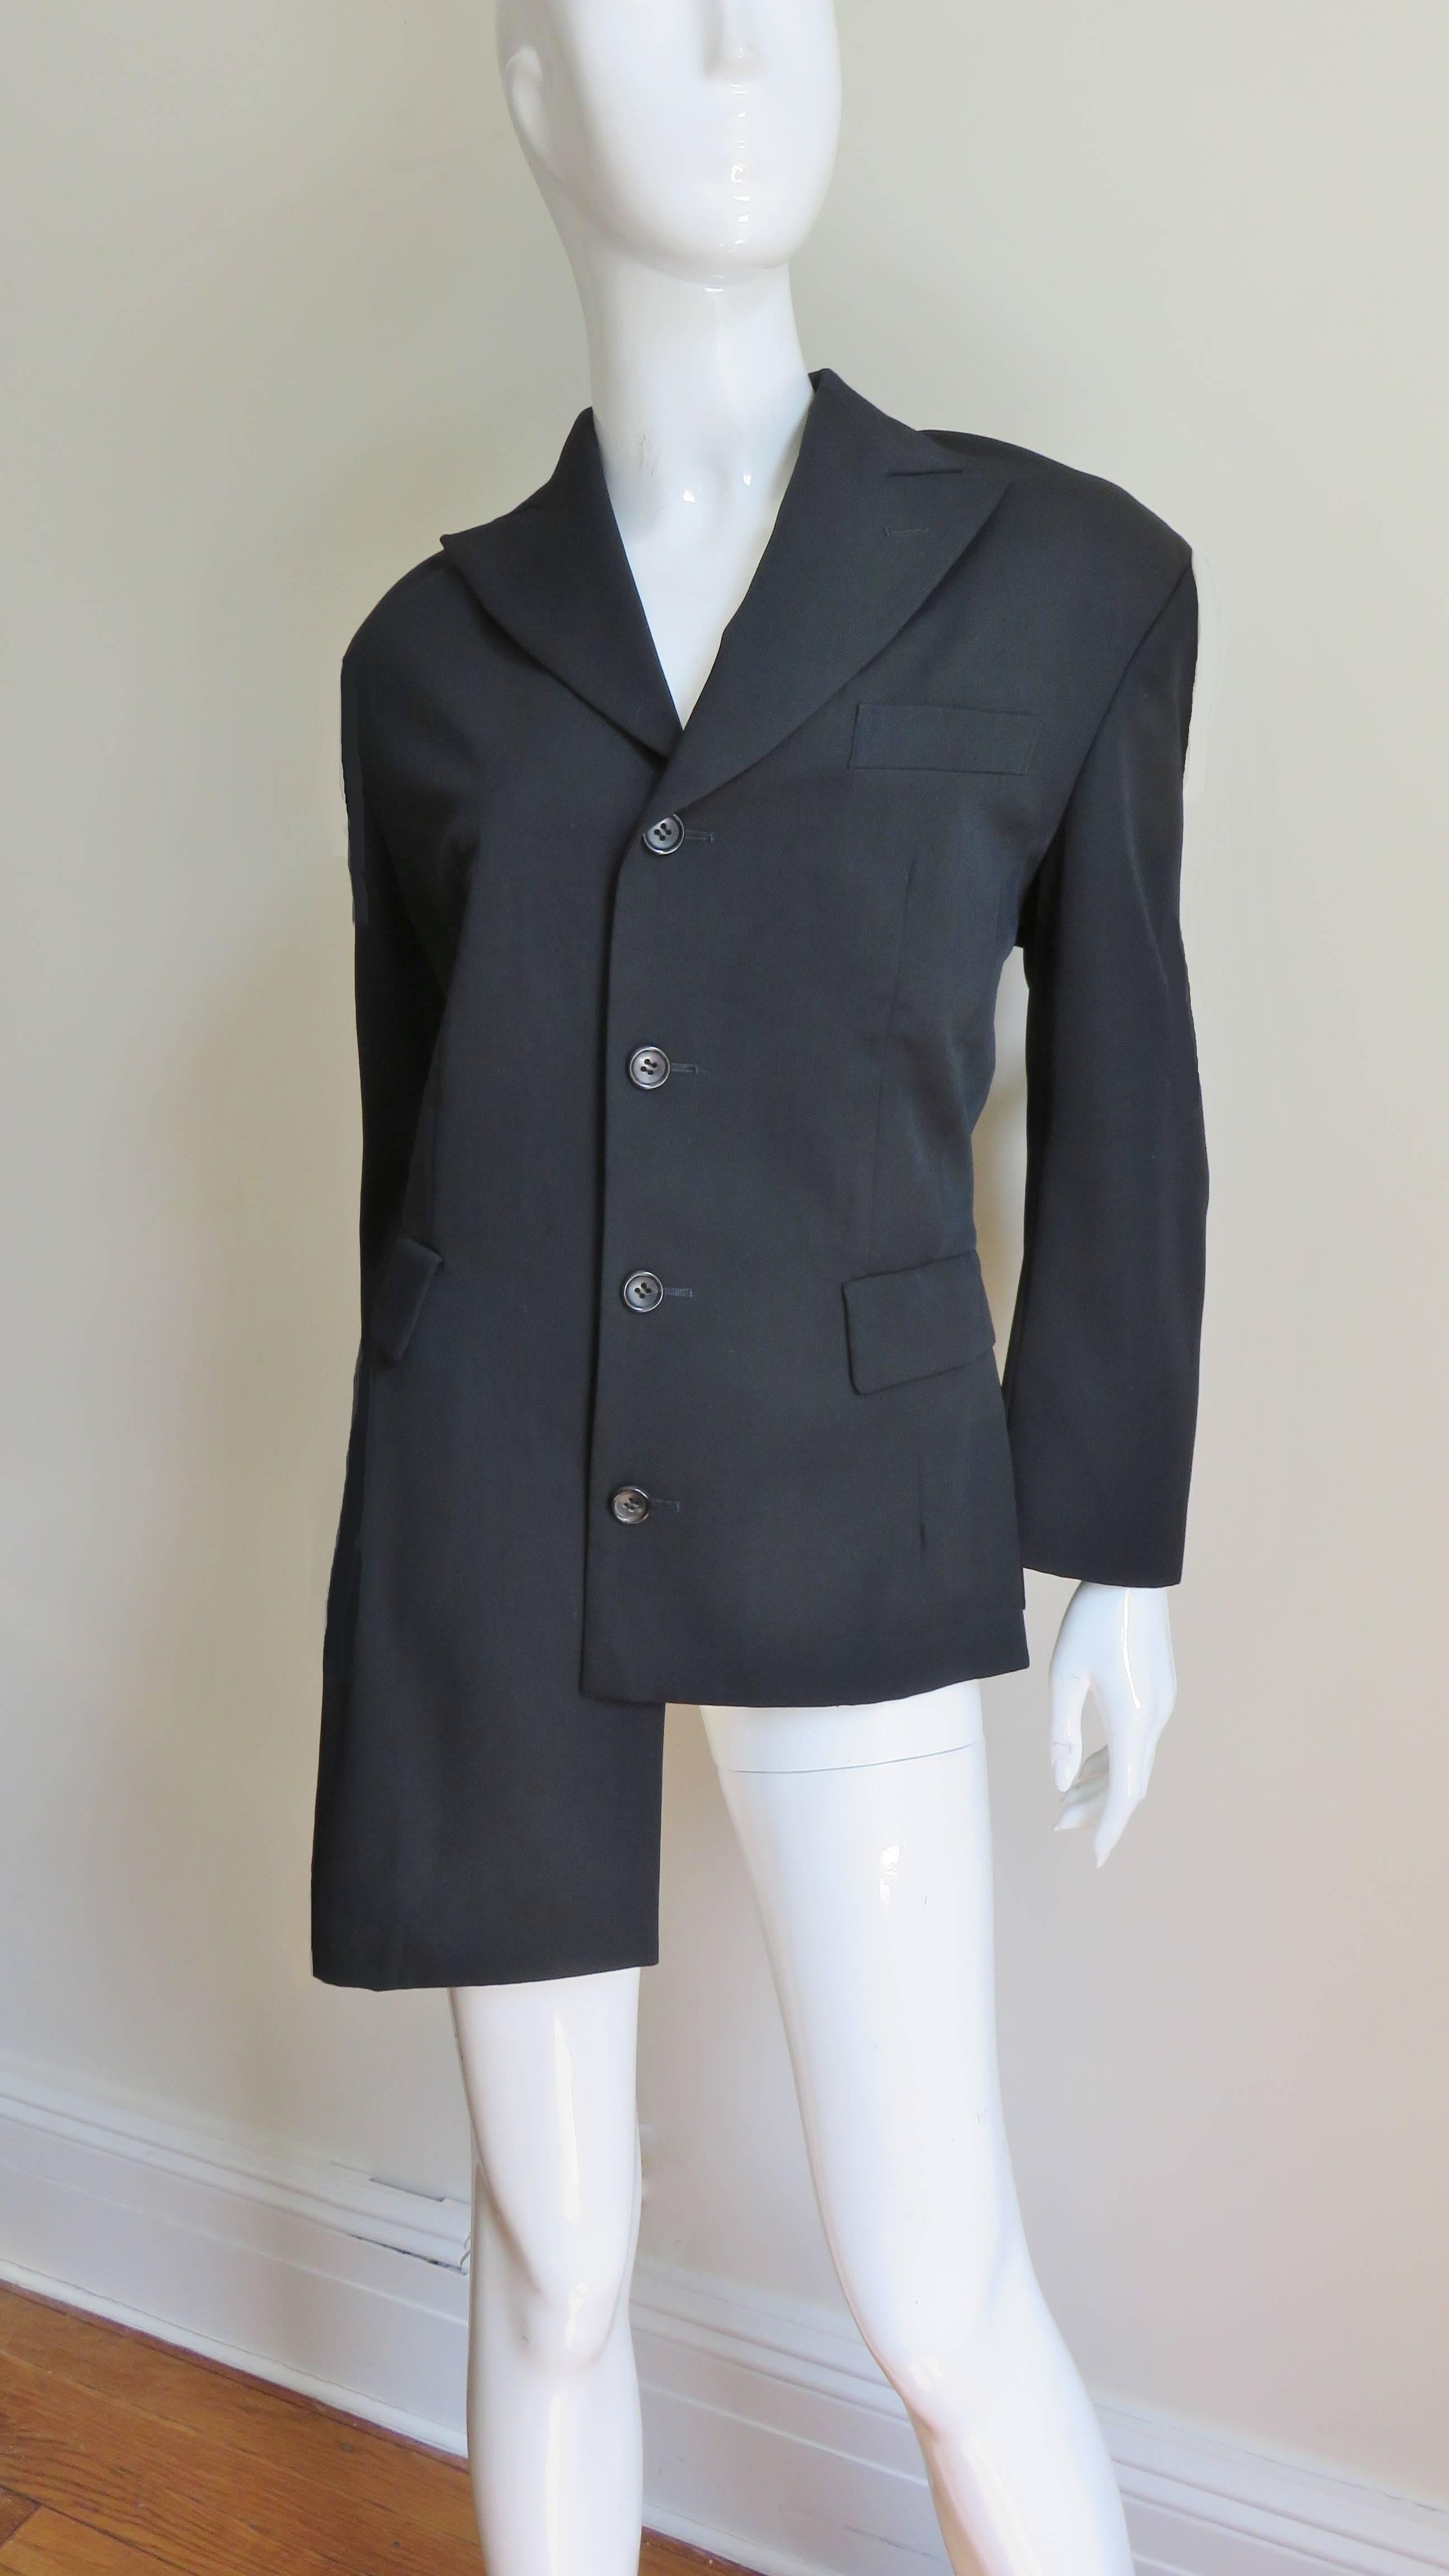 Comme des Garcons AD 1991 Asymmetric Jacket In Good Condition For Sale In Water Mill, NY